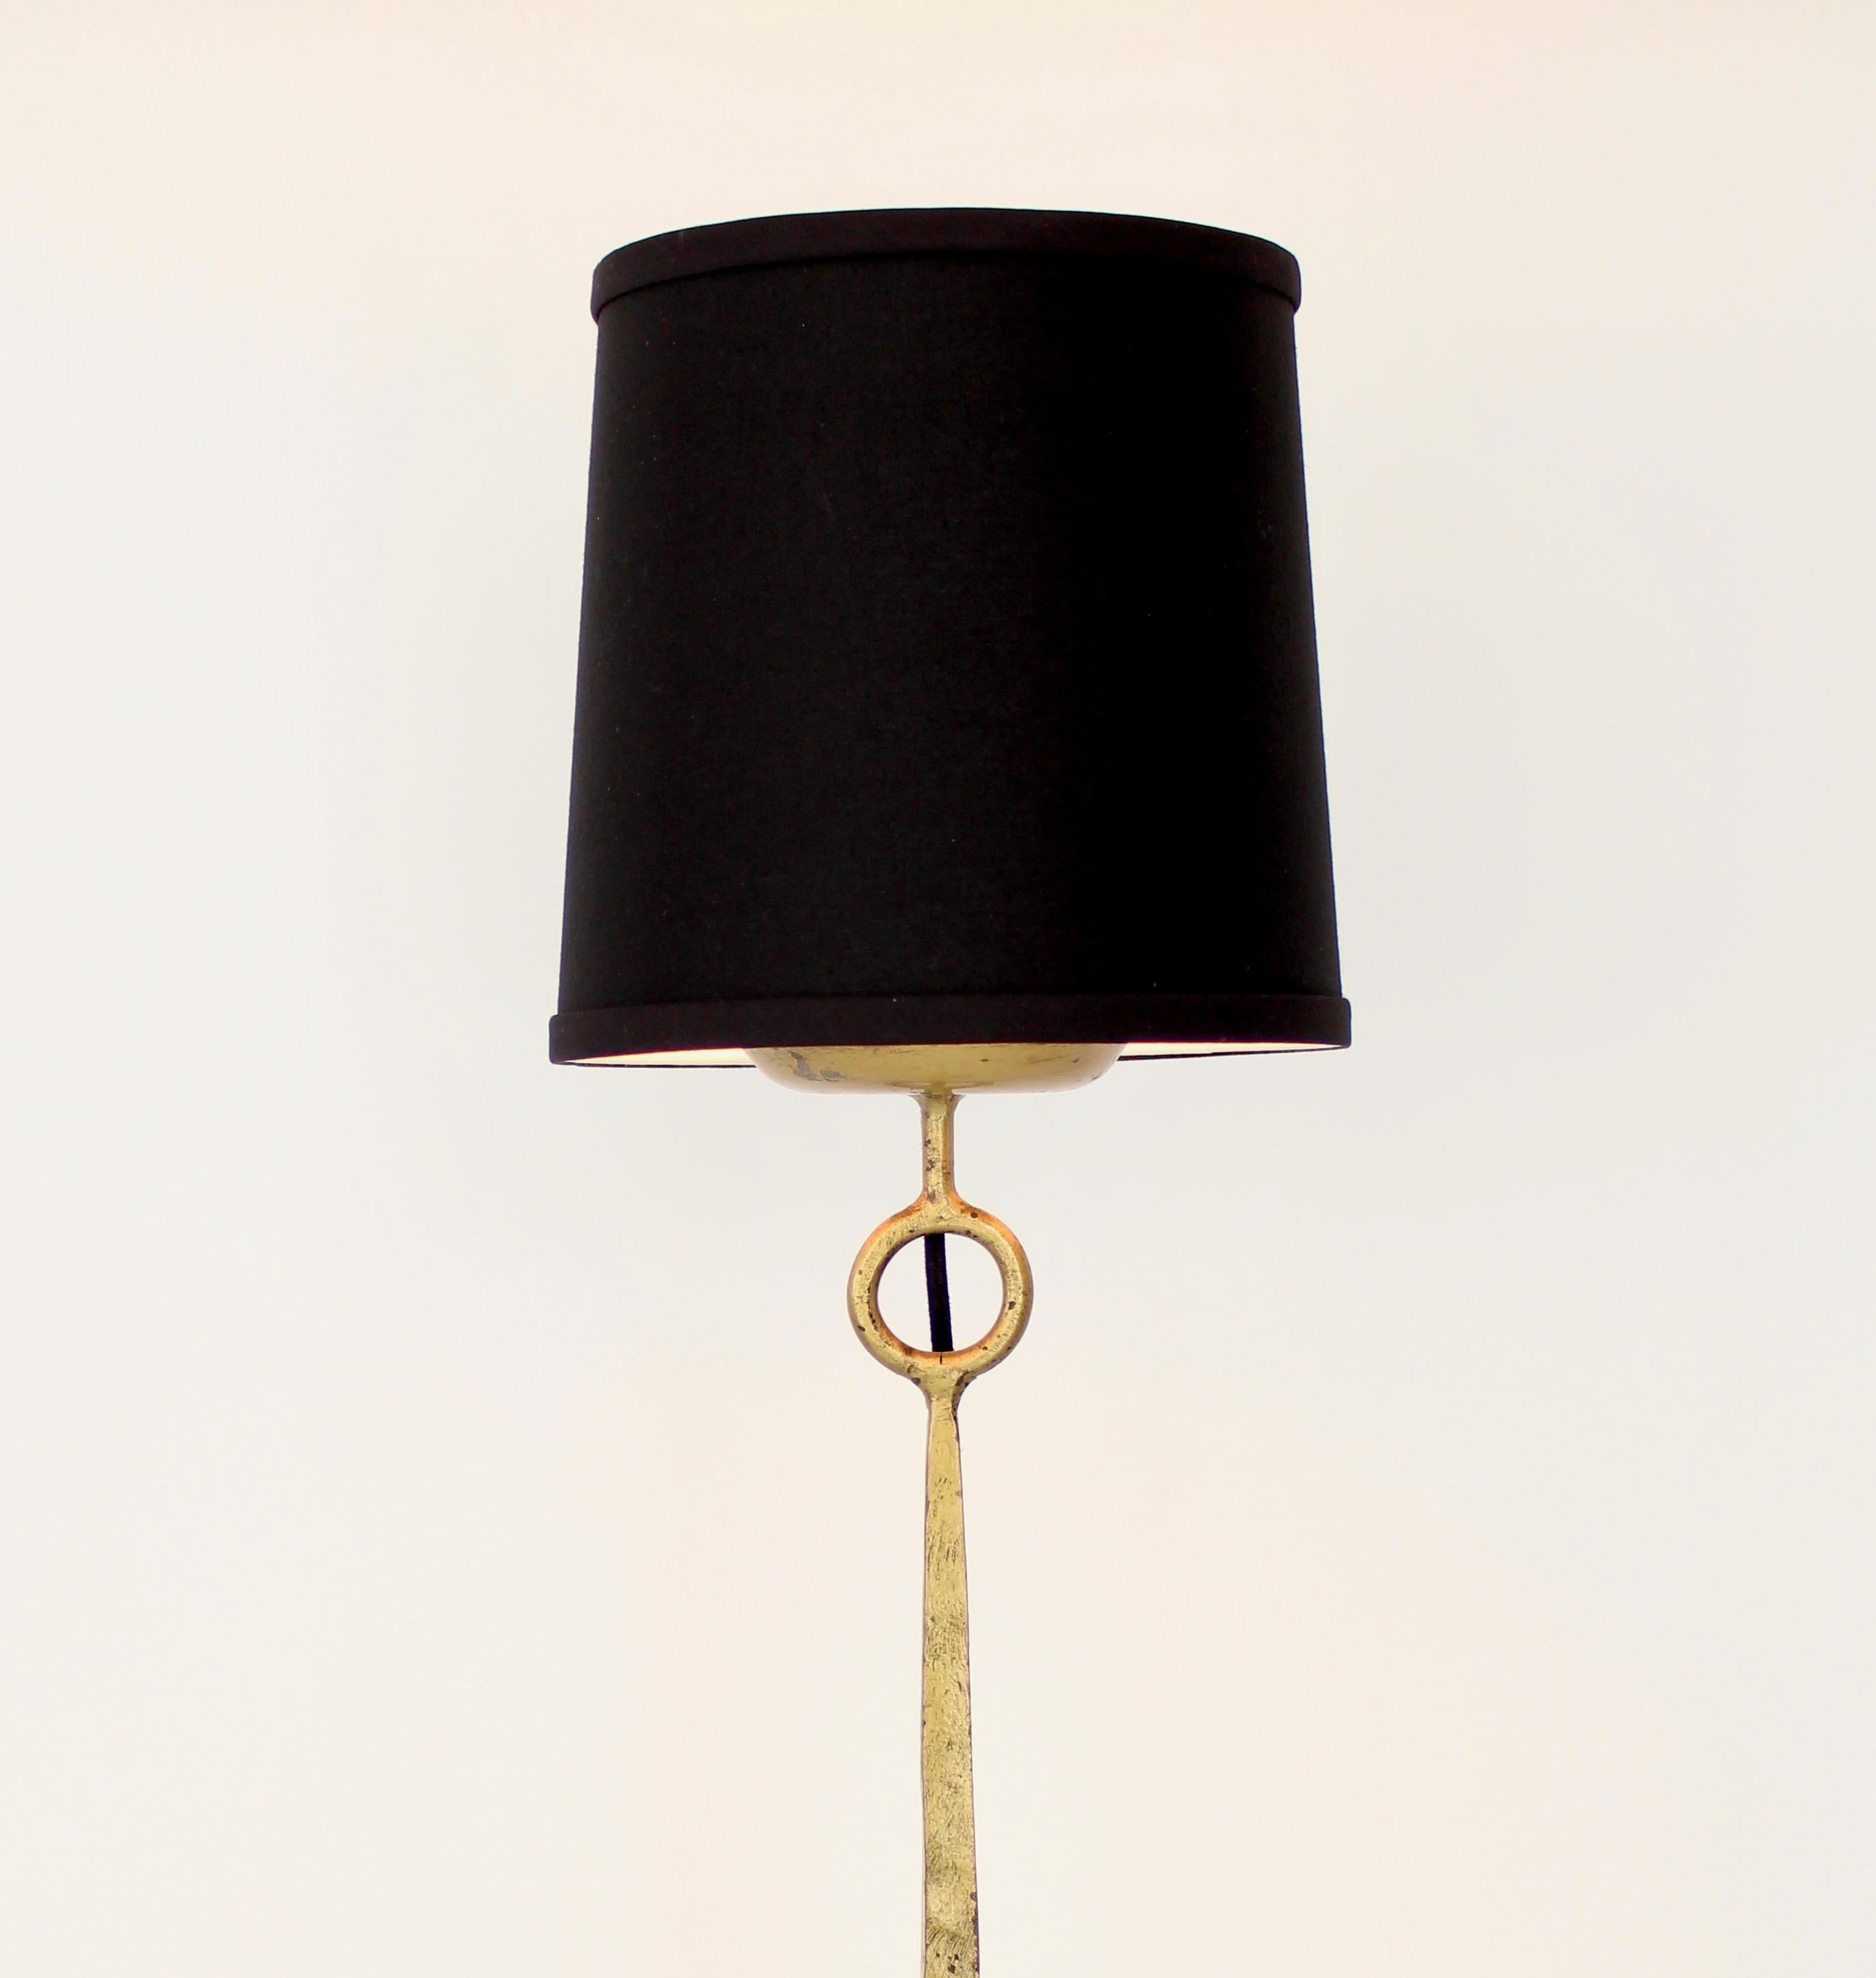 Maison Ramsay French neoclassical motif circa 1940 single gilded iron table lamp.
Measures: Overall size: 12